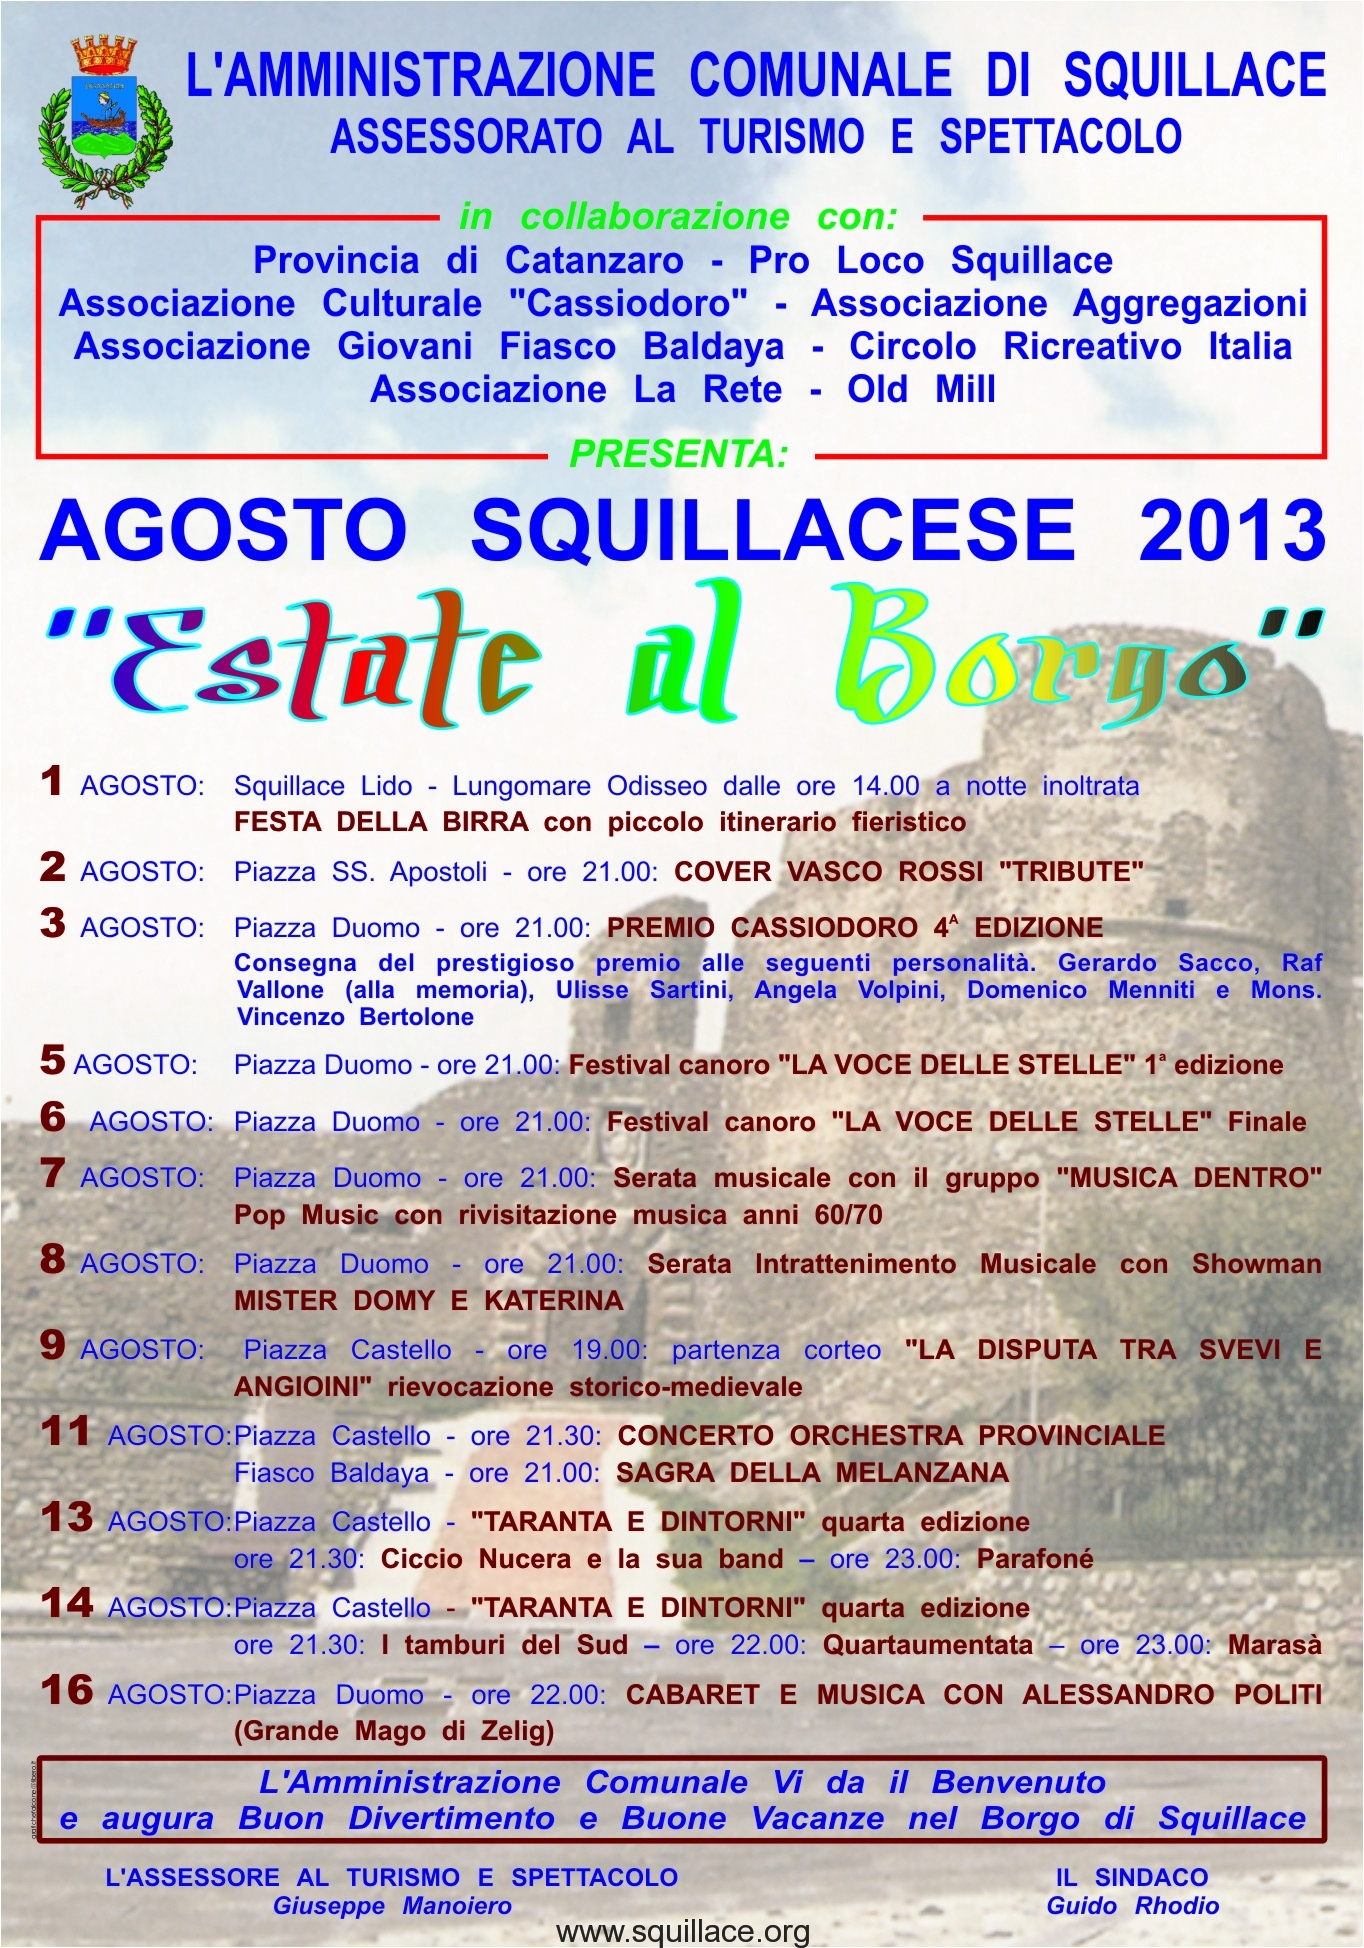 AGOSTO SQUILLACESE 2013